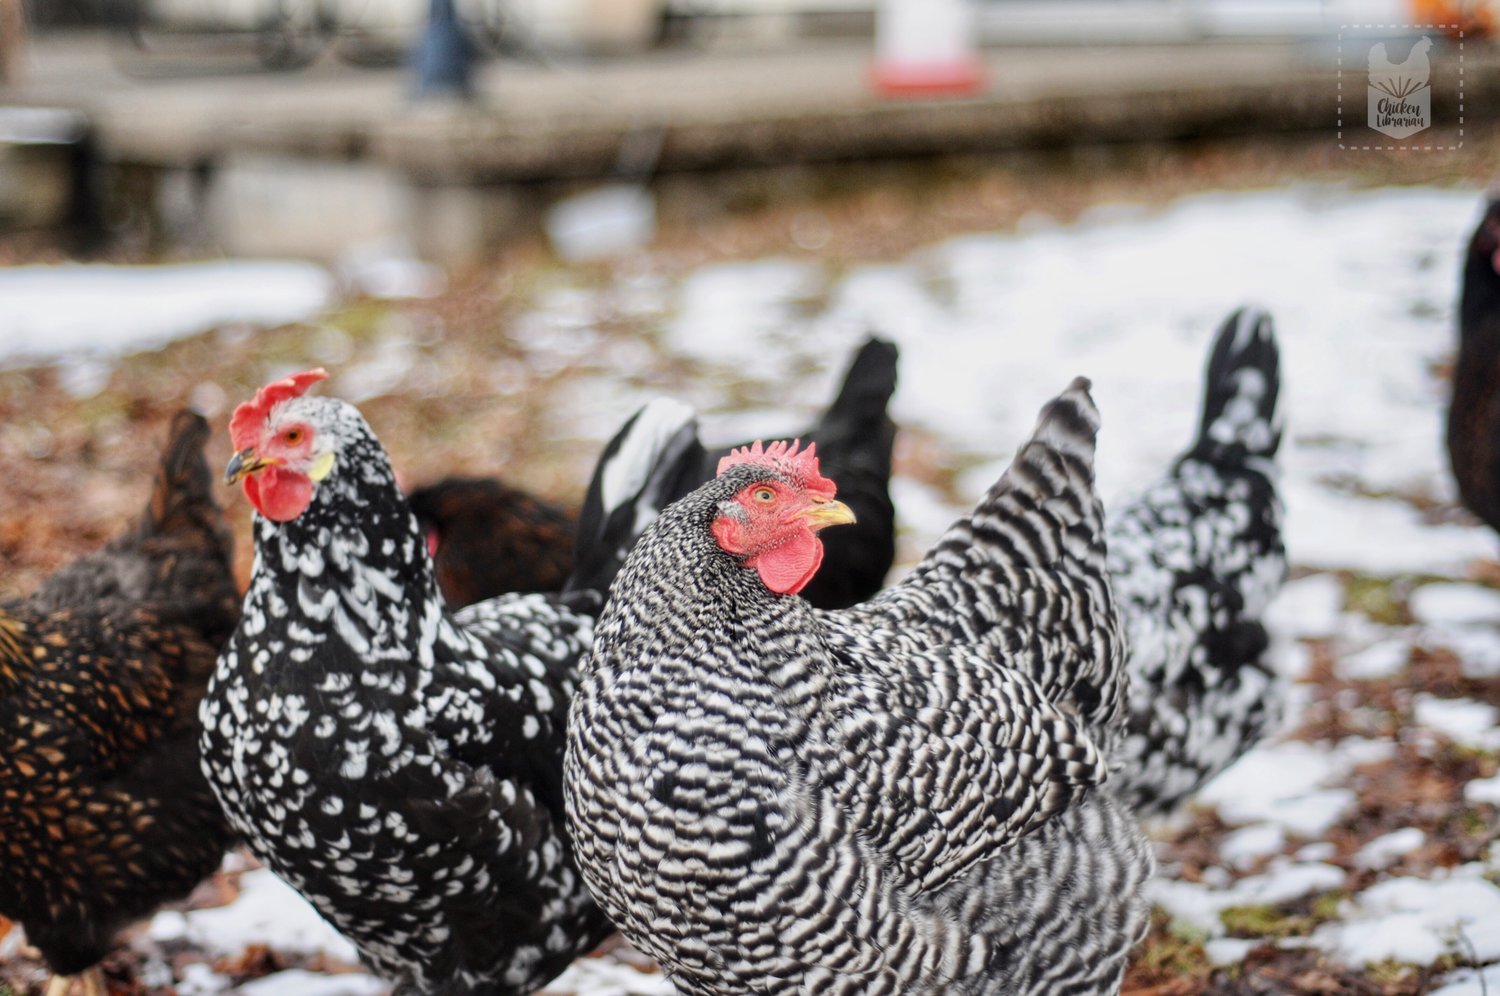 Tomy, the Ancona on the left, and Sassy, the Barred Rock at center, are totally over it. They say, “Enough with the pictures and the talking; get your chickens already! You’ll see how much fun we are!”